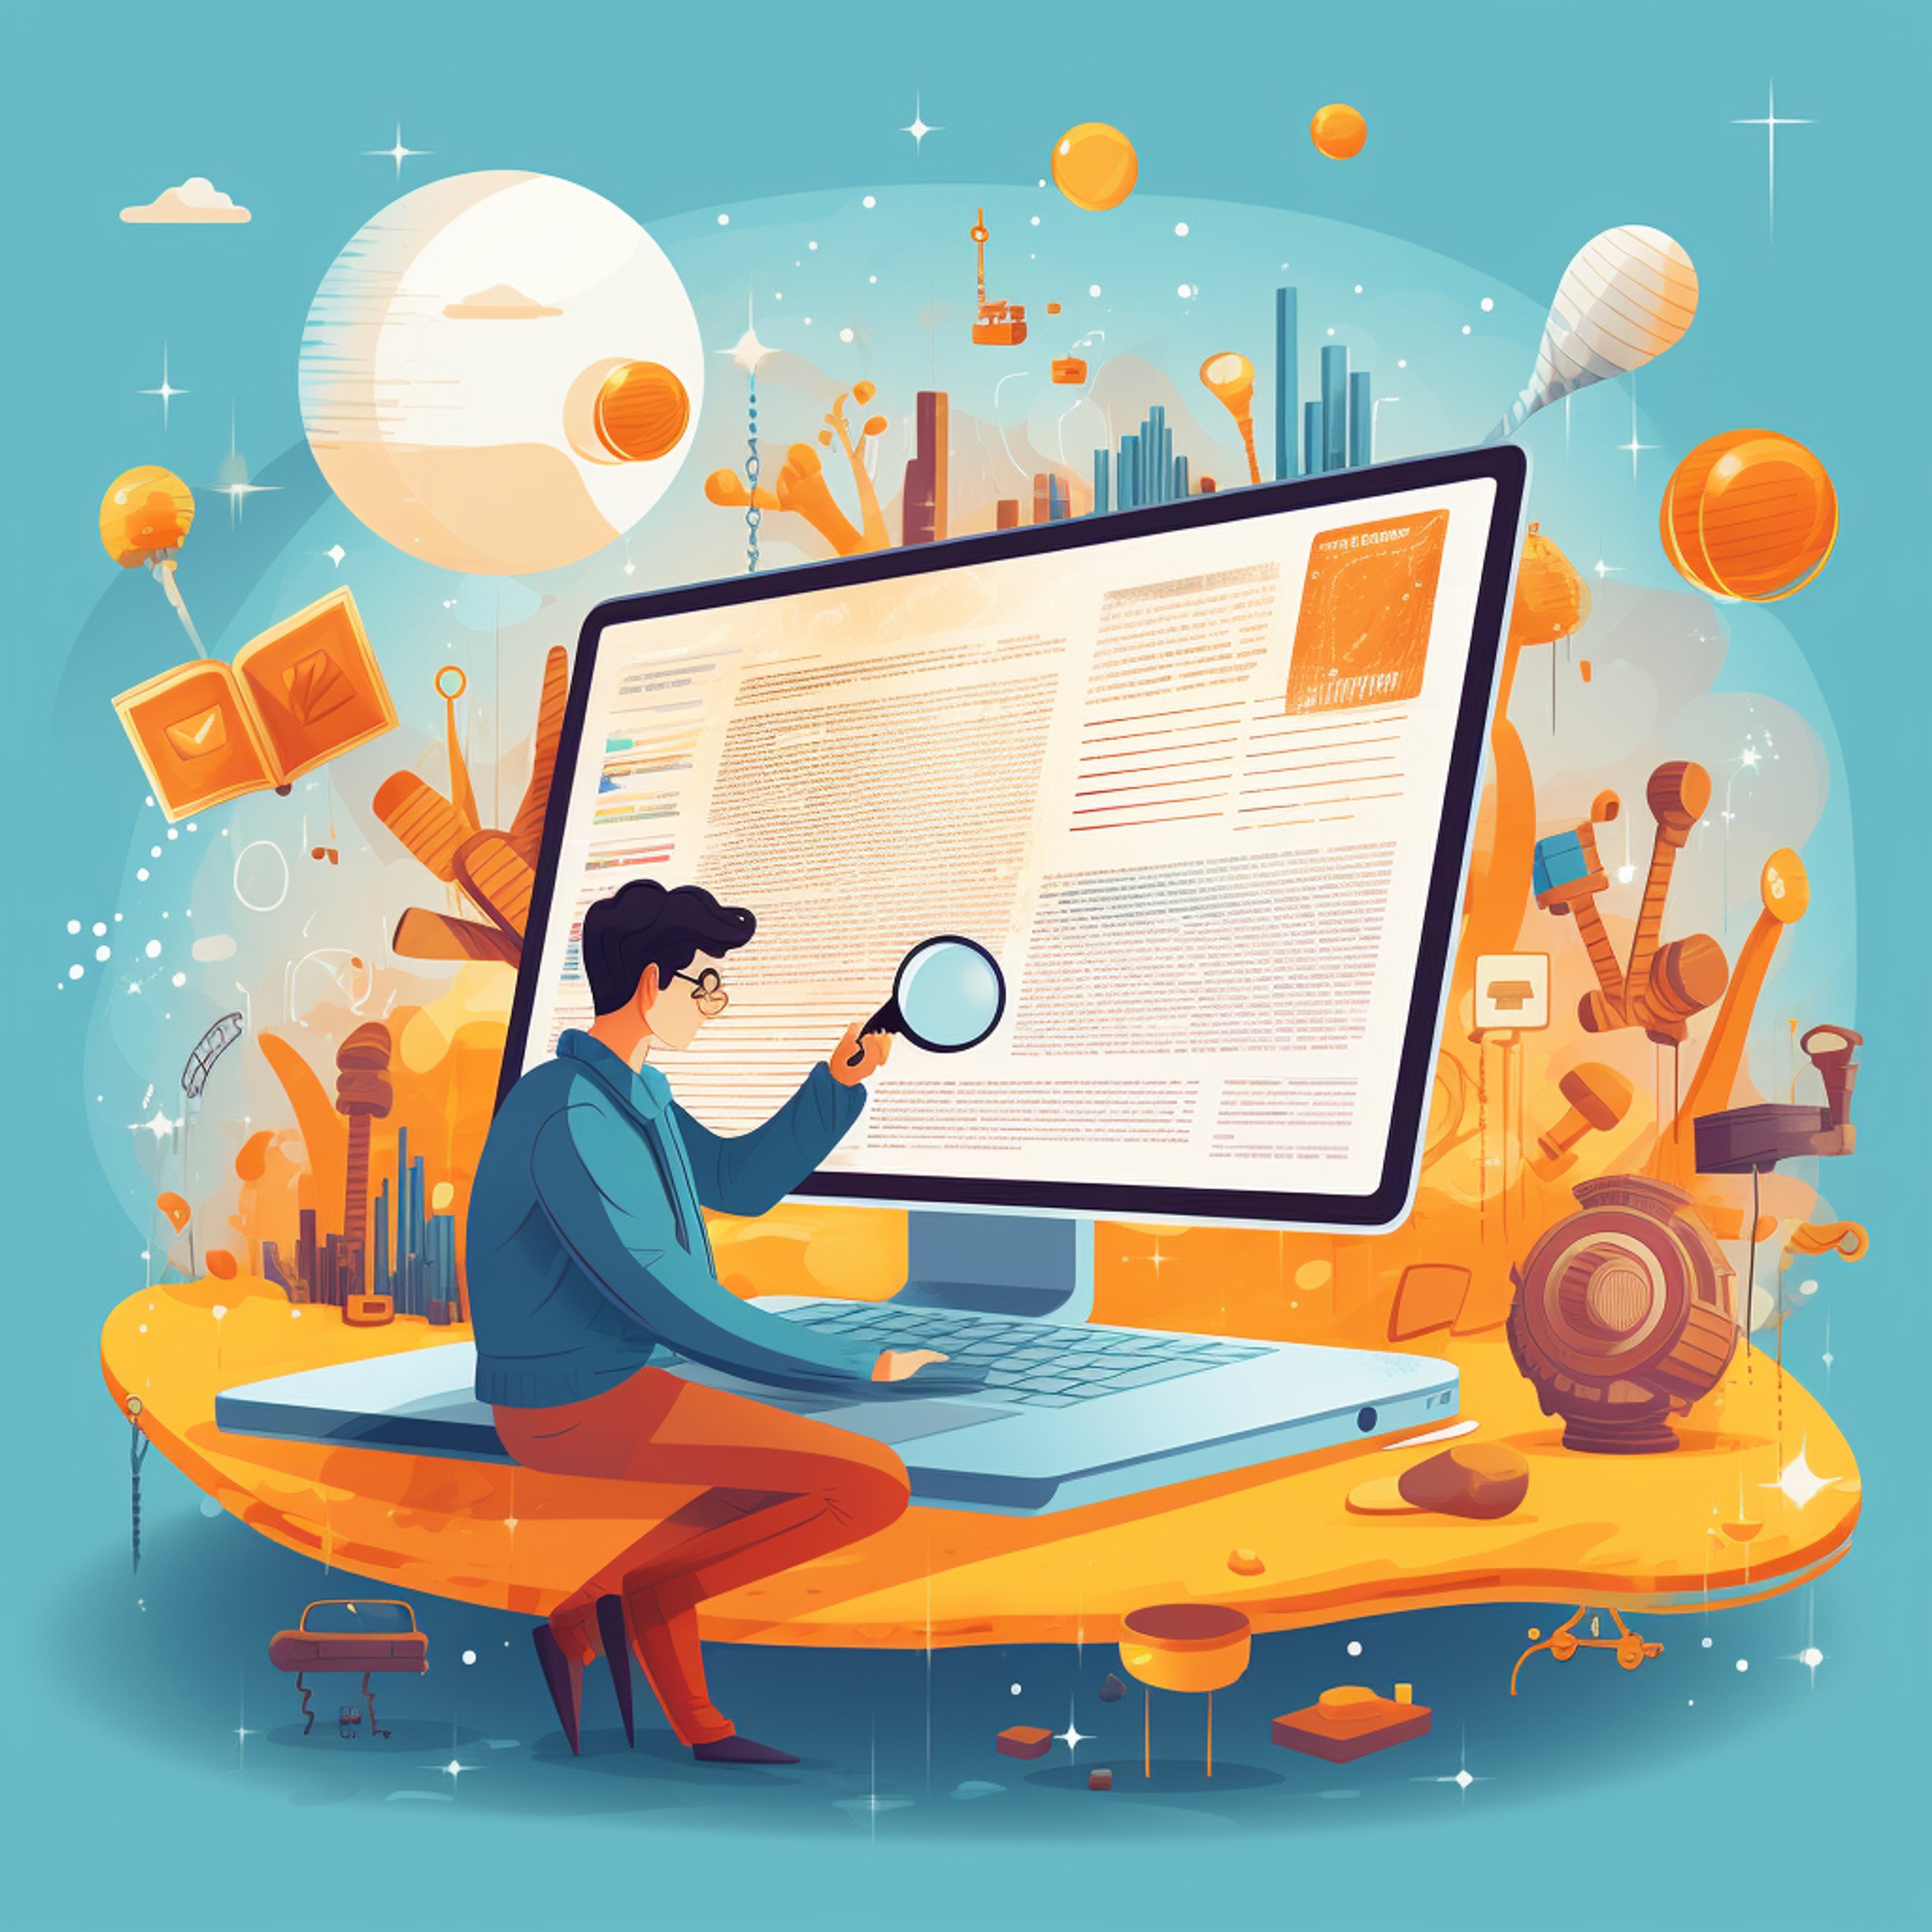 Illustration of a character trying to do research among keywords on his giant personal computer.